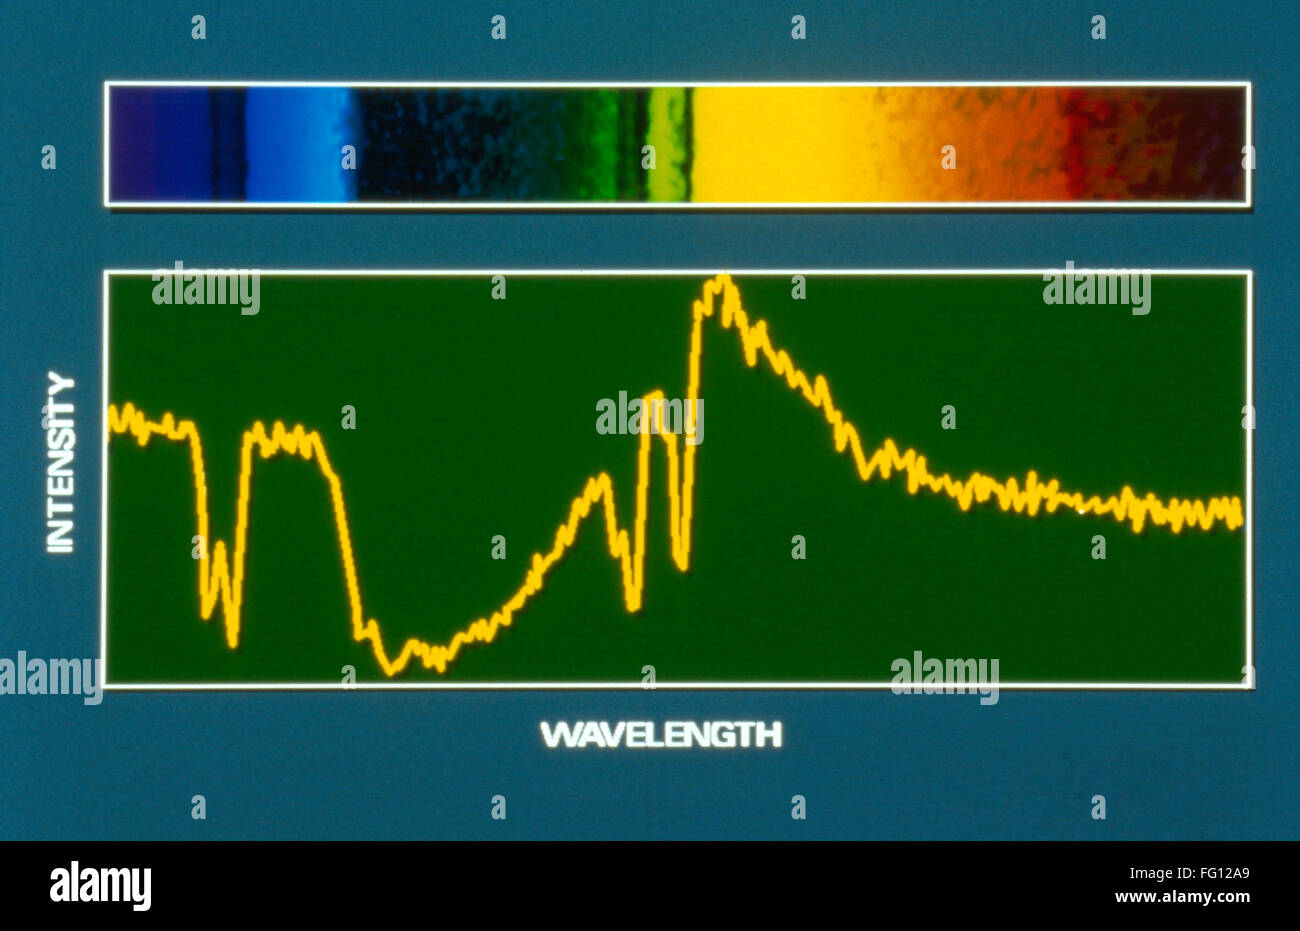 ELECTROMAGNETIC SPECTRUM. /nChart illustrating the wavelengths and intensities of different colors in the visible spectrum, c1991. Stock Photo